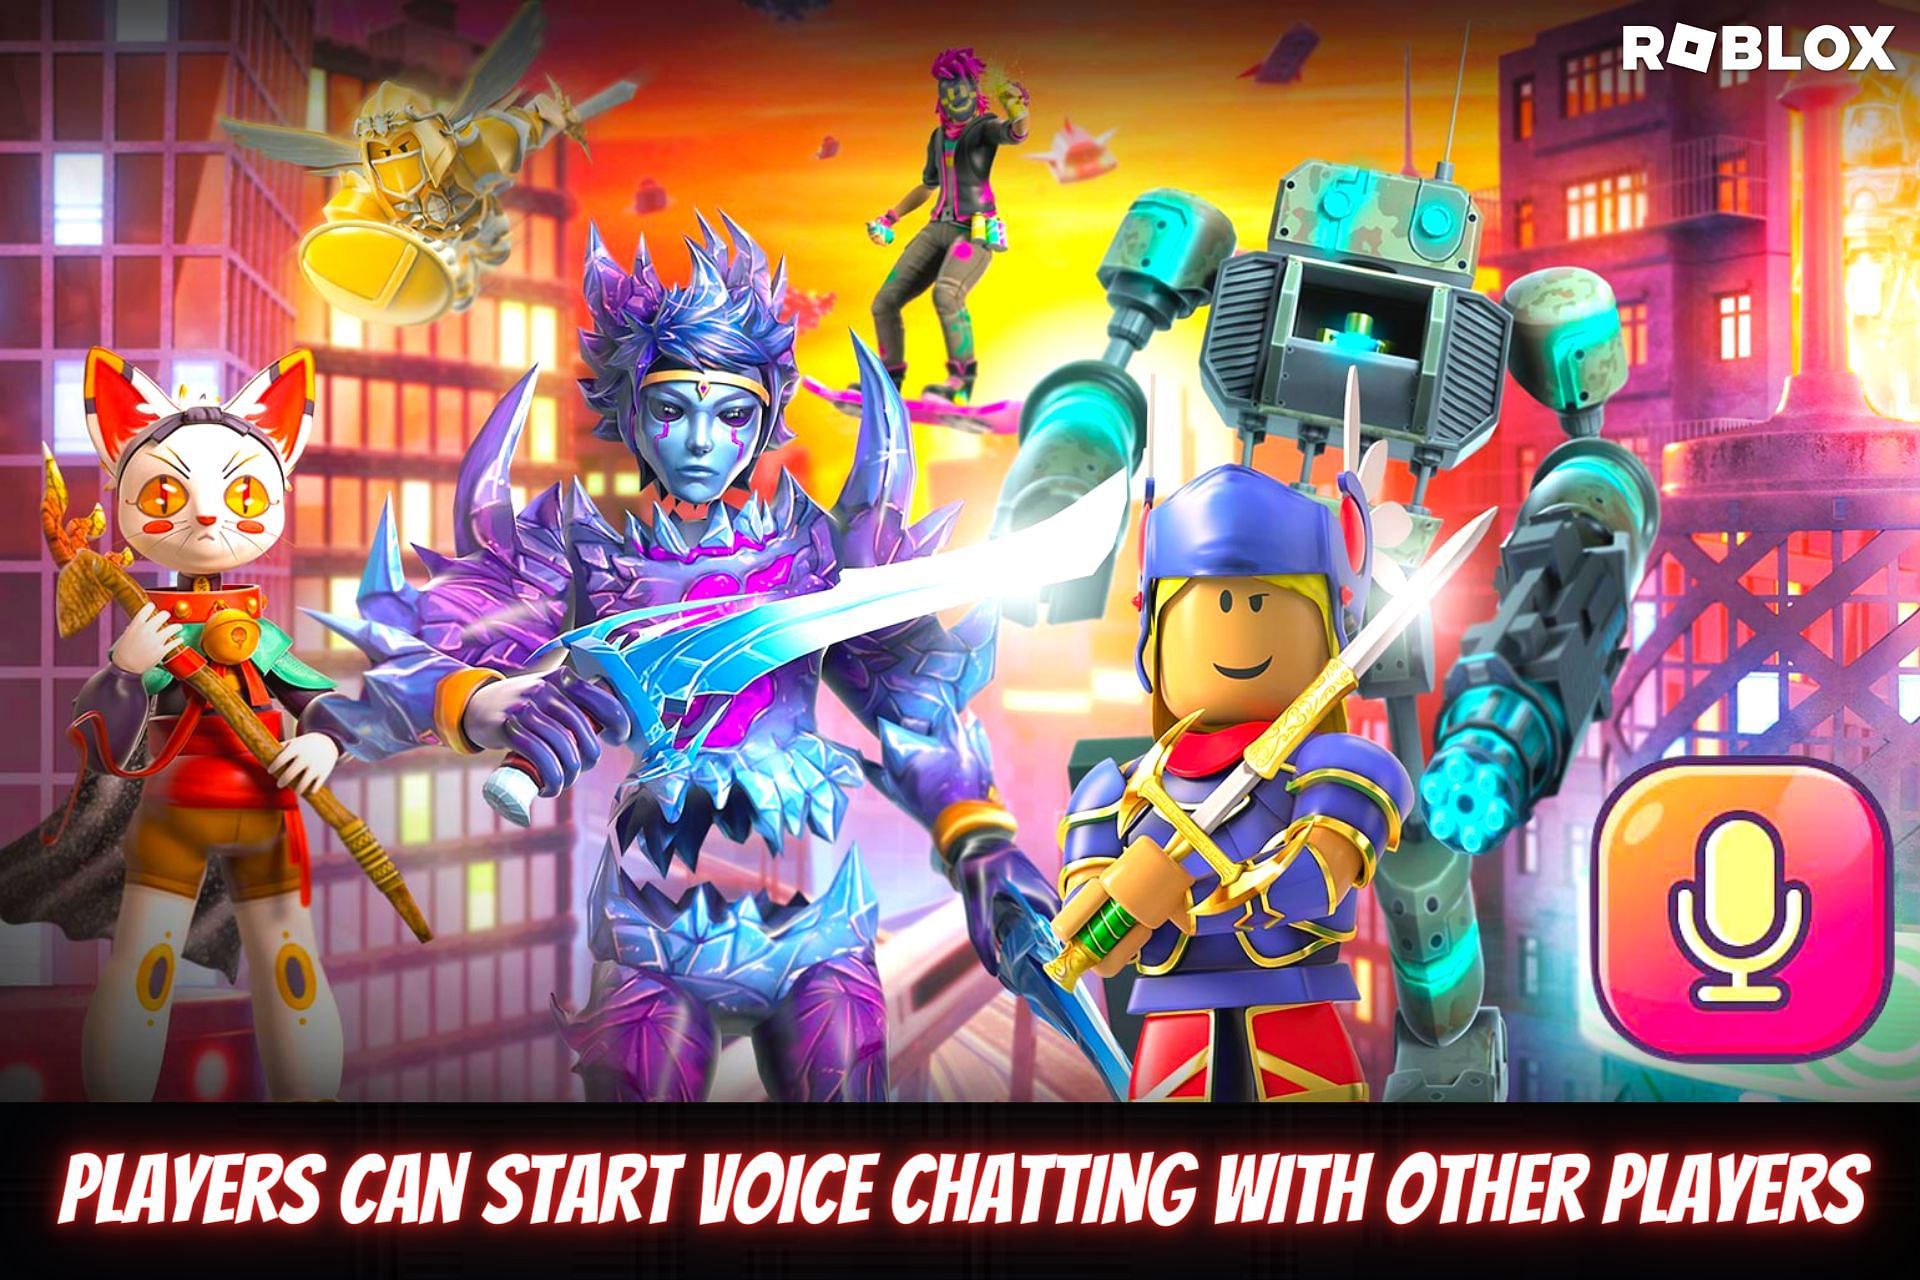 Players can start voice chatting with other players